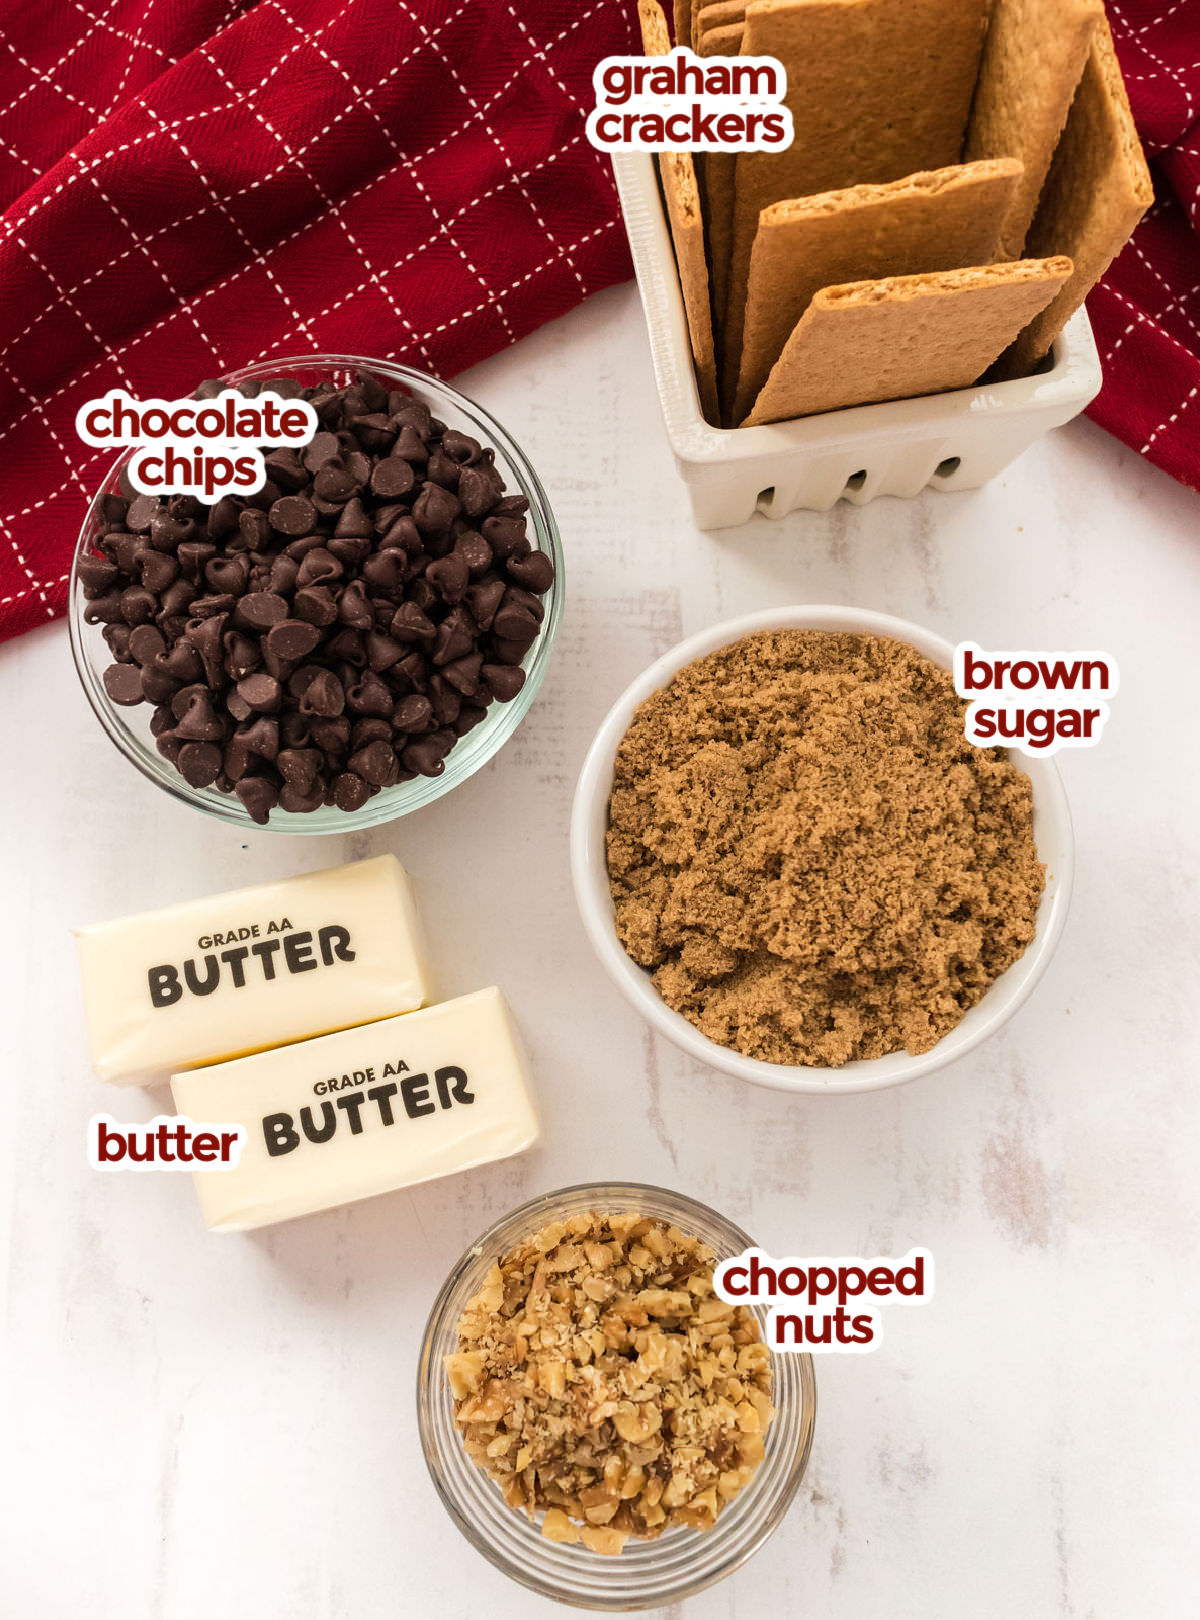 All the ingredients you will need to make Graham Cracker Toffee including Graham Crackers, Chocolate Chips, Brown Sugar, Butter and Chopped Nuts.